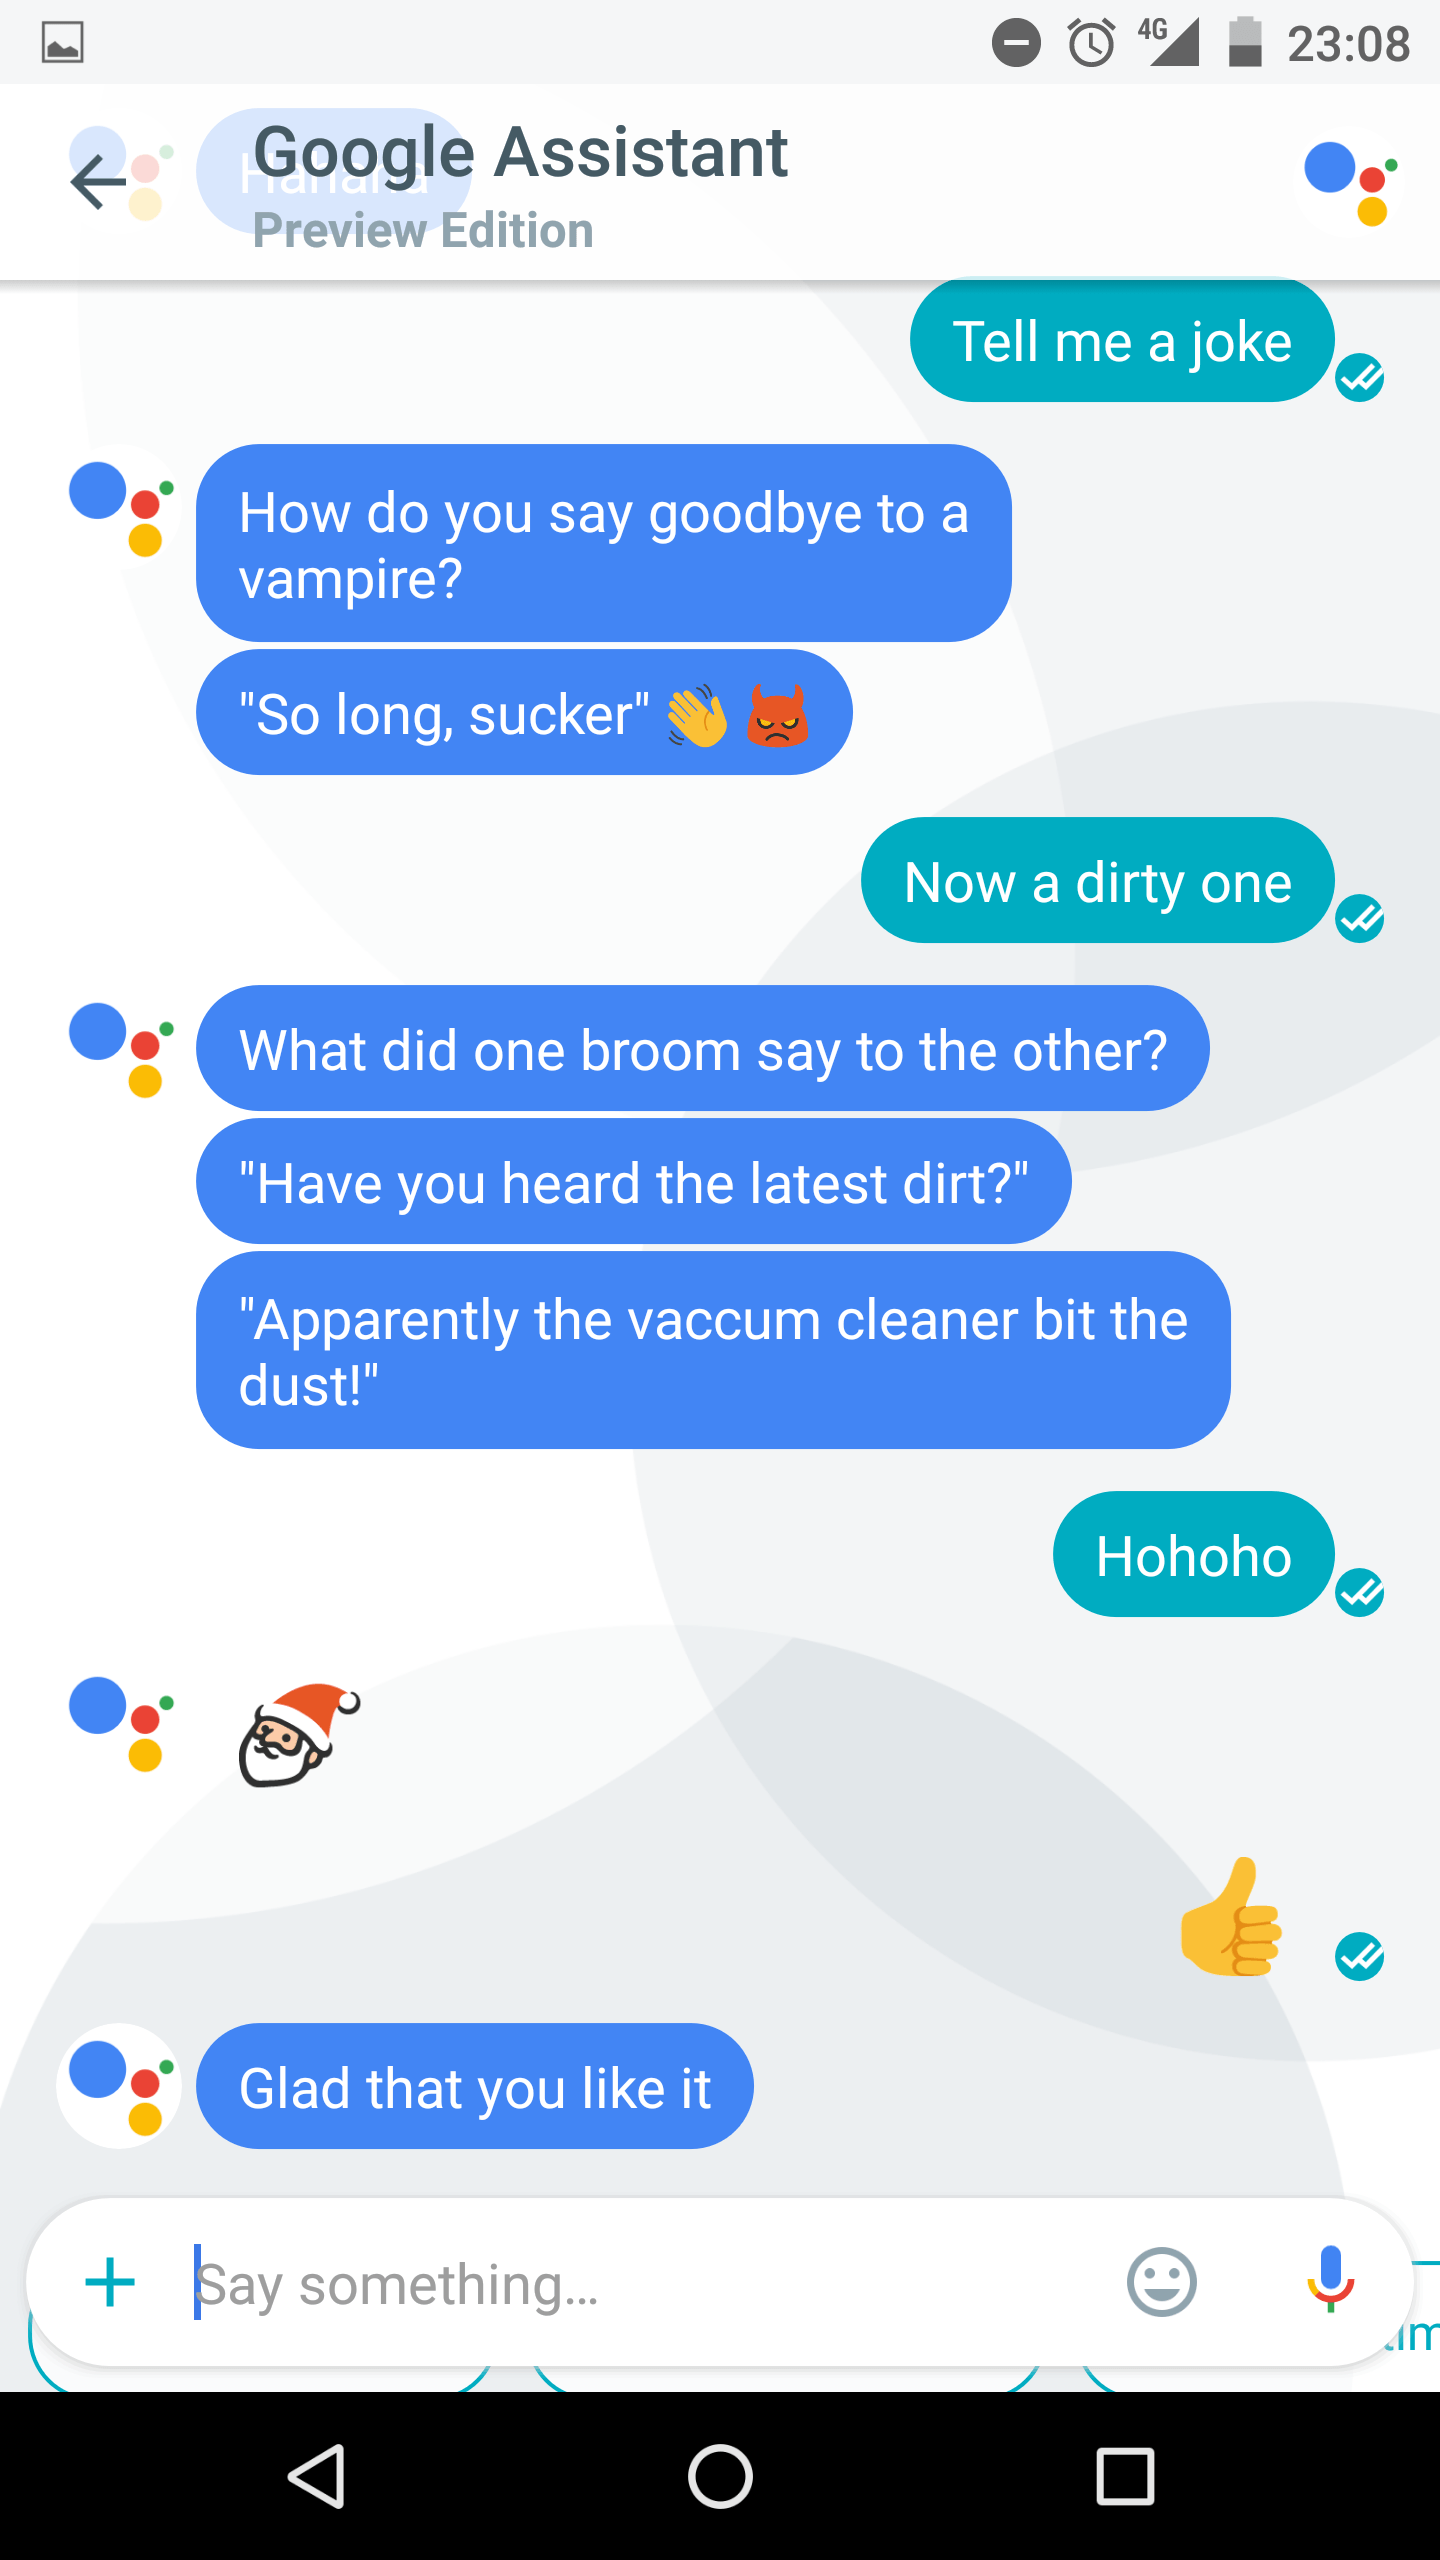 Sexy Google Logo - Not sure if Google assistant is bad, or very good at avoiding